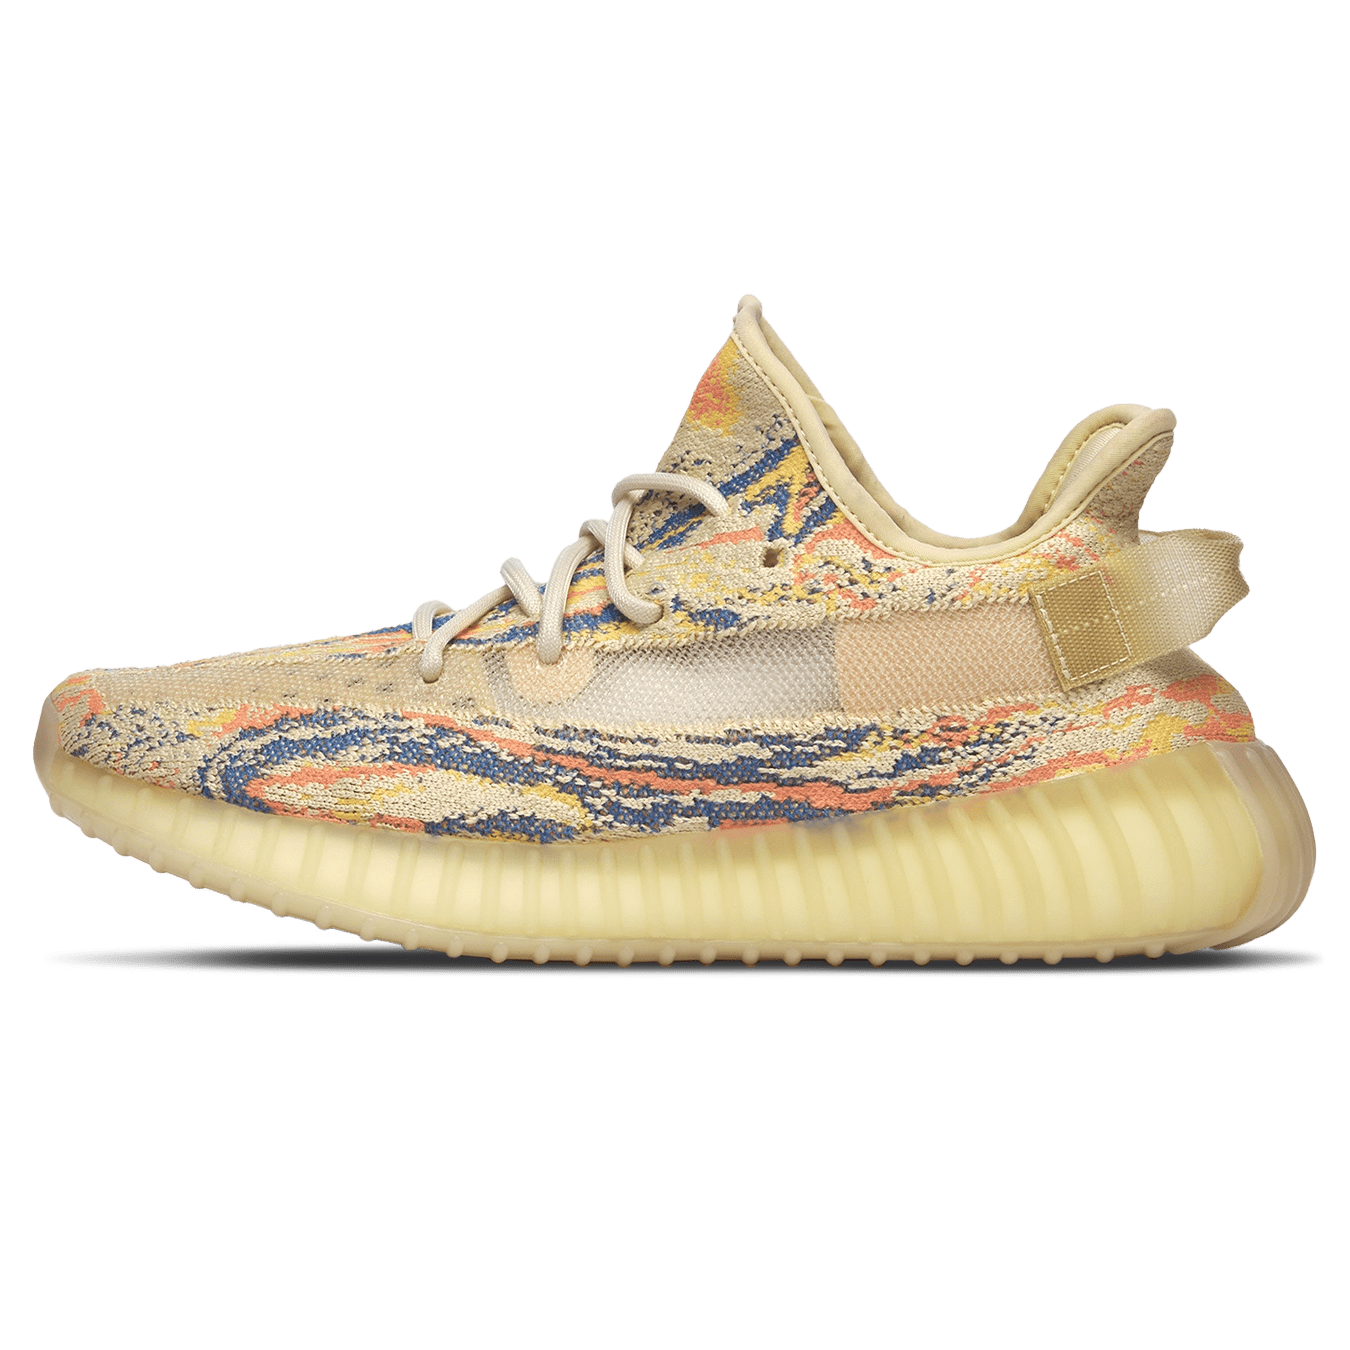 adidas YEEZY BOOST 350 V2 MX Oat Detailed Look